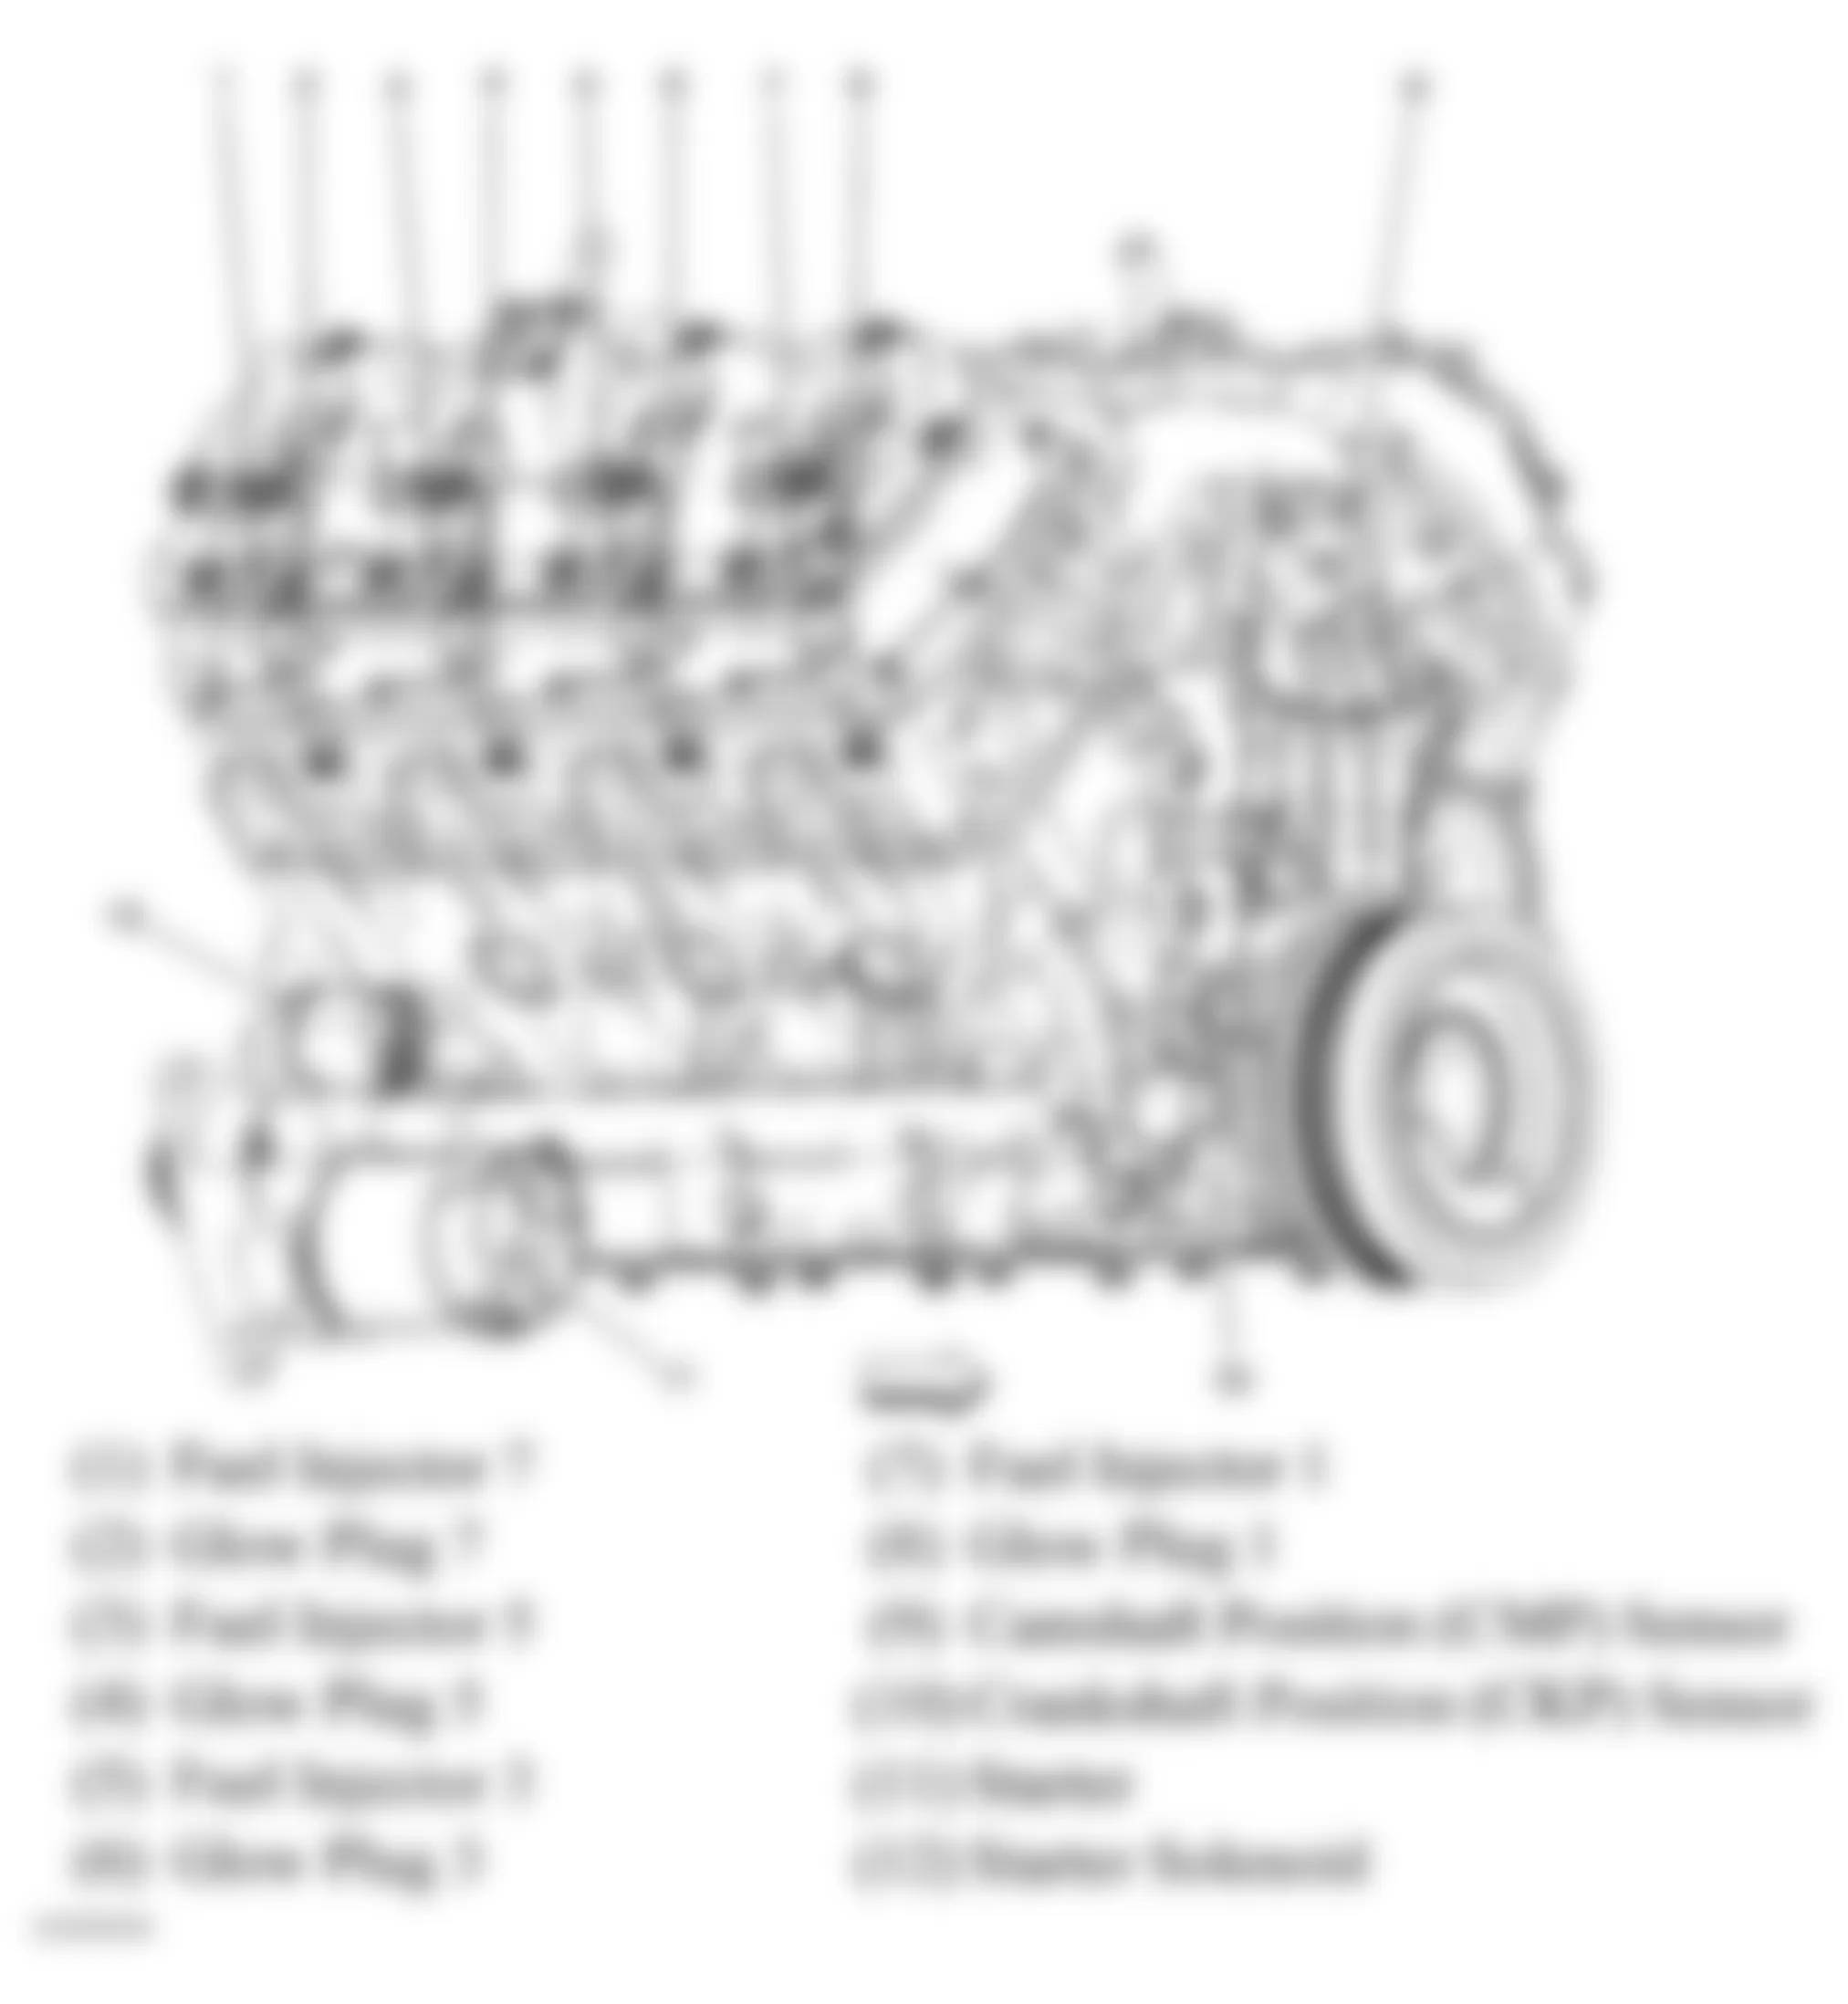 GMC Savana G2500 2006 - Component Locations -  Right Side Of Engine (6.6L VIN W)